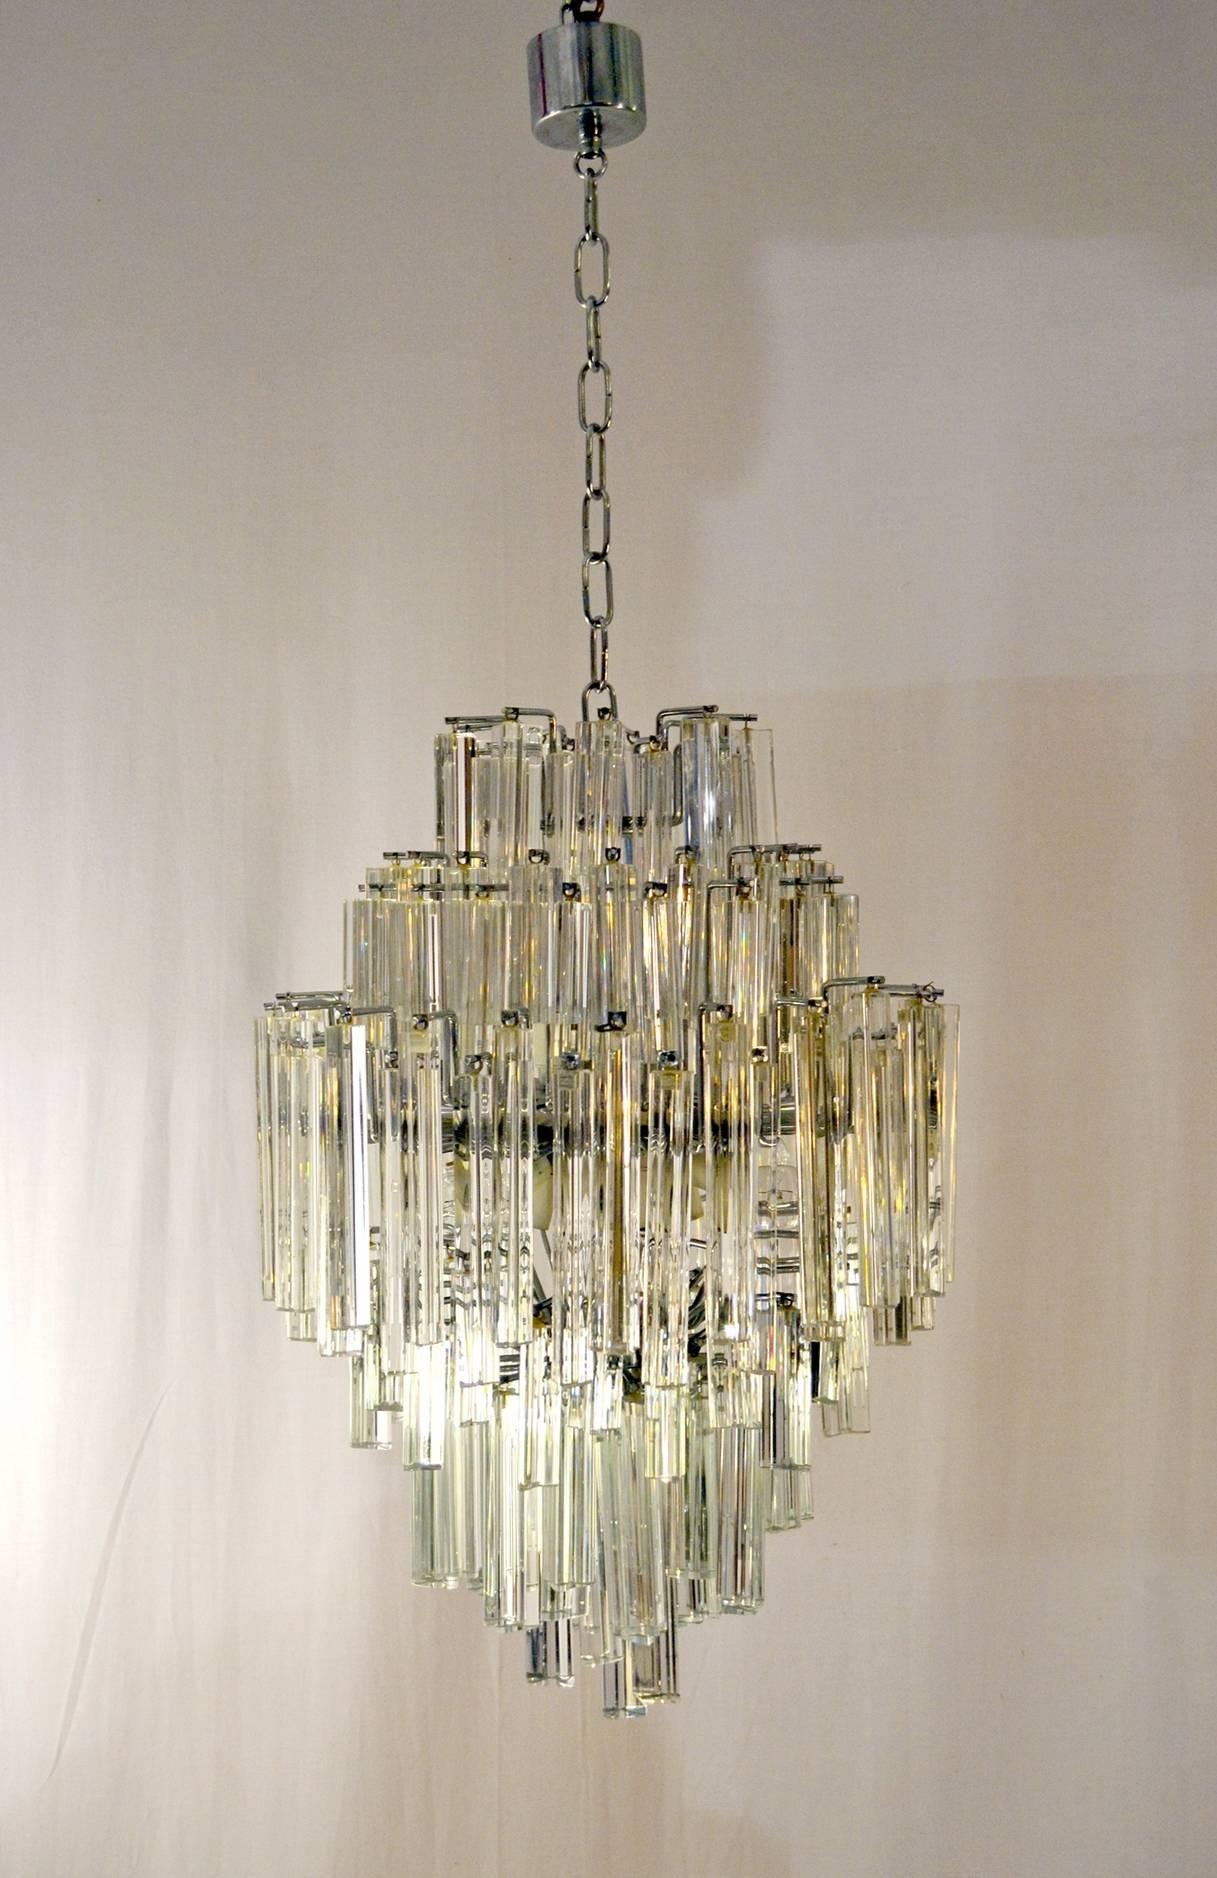 A 170 piece crystal so-called Triedri chandelier manufactured by Venini, Murano. The crystals are in different sizes and are hanging in tiers on a steel chromed base. Gives magnificent light and reflections in the room. The structure is 70 cm high